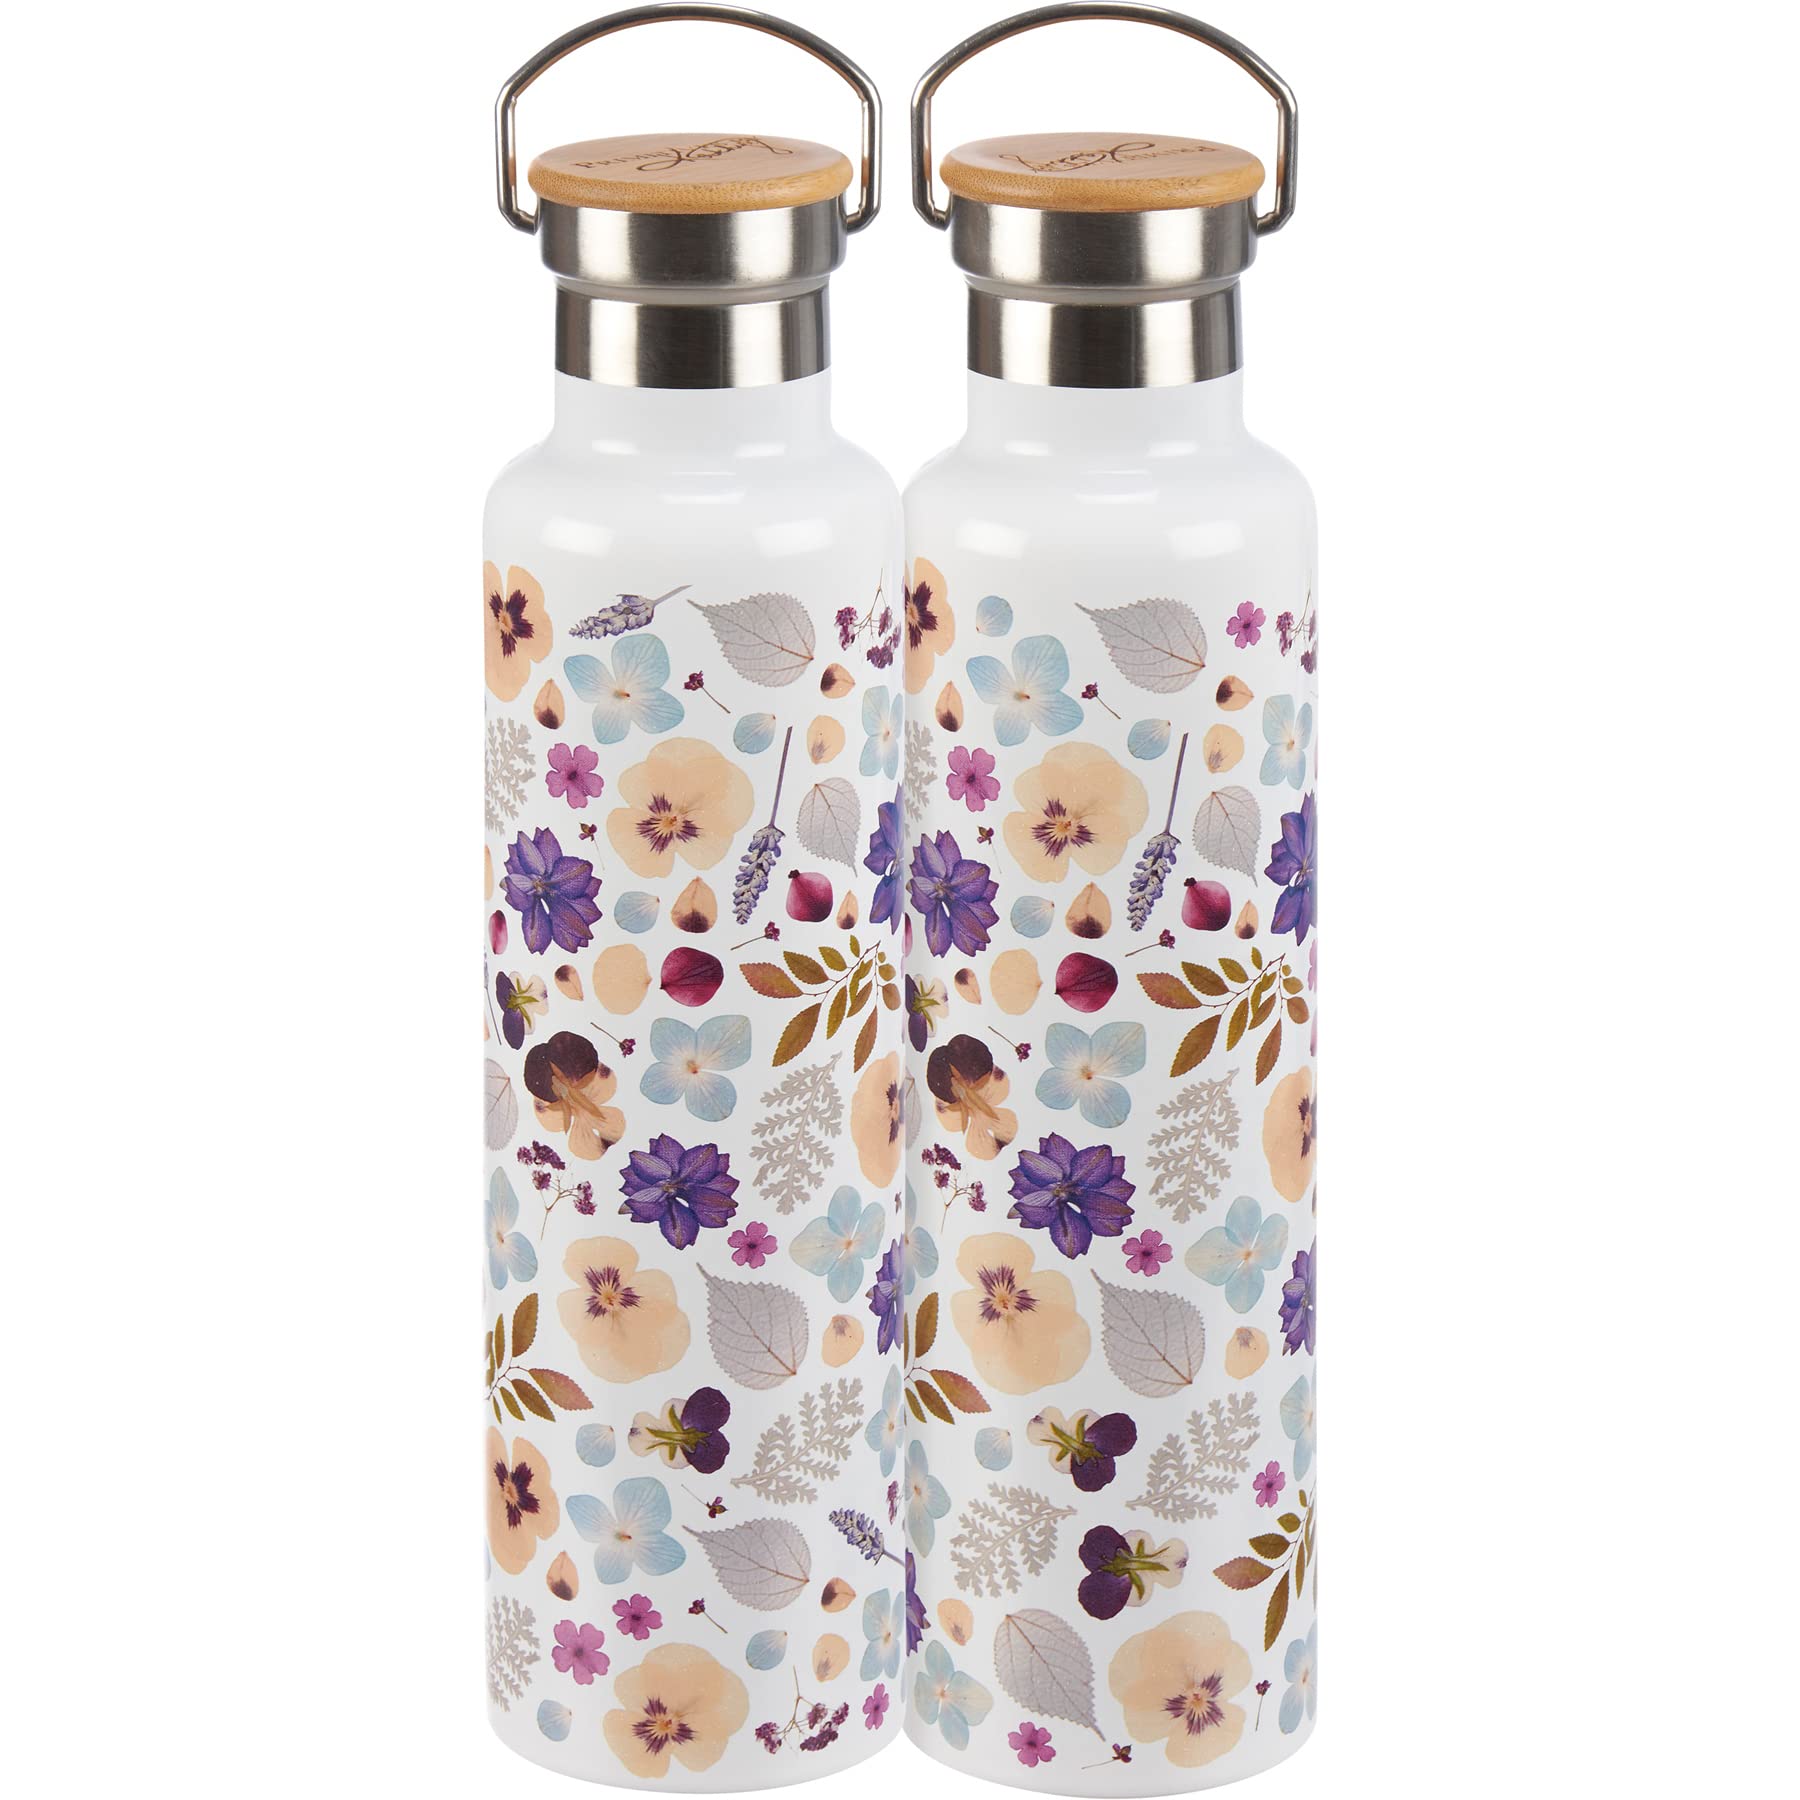 Primitives by Kathy Flowers Insulated Bottle